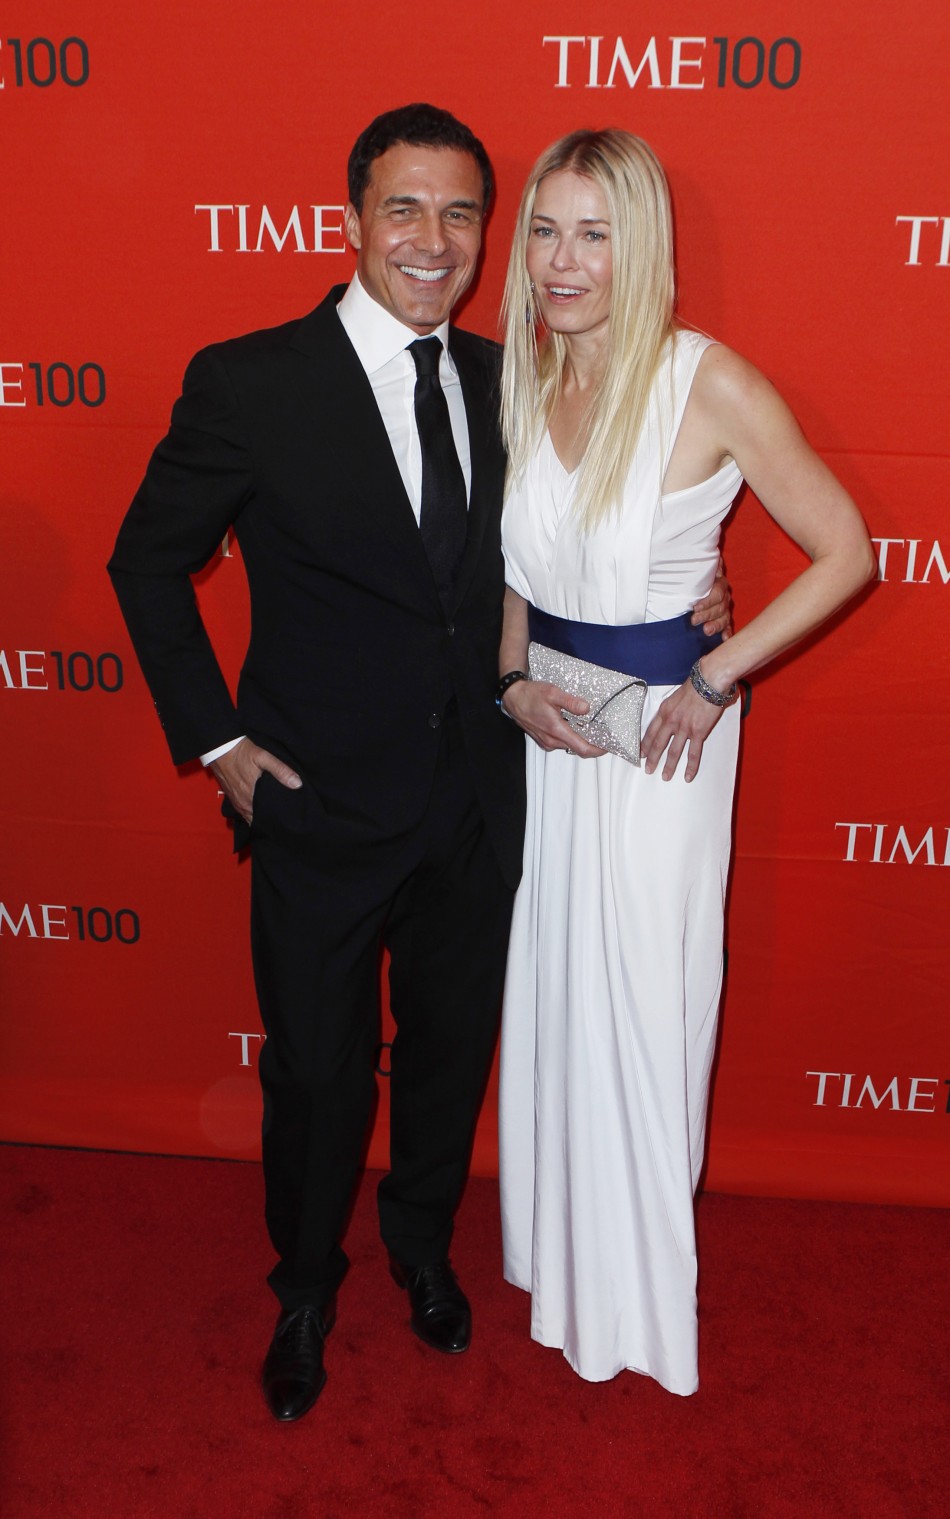 Actress Chelsea Handler arrives with Andre Balazs to be honored at the Time 100 Gala in New York